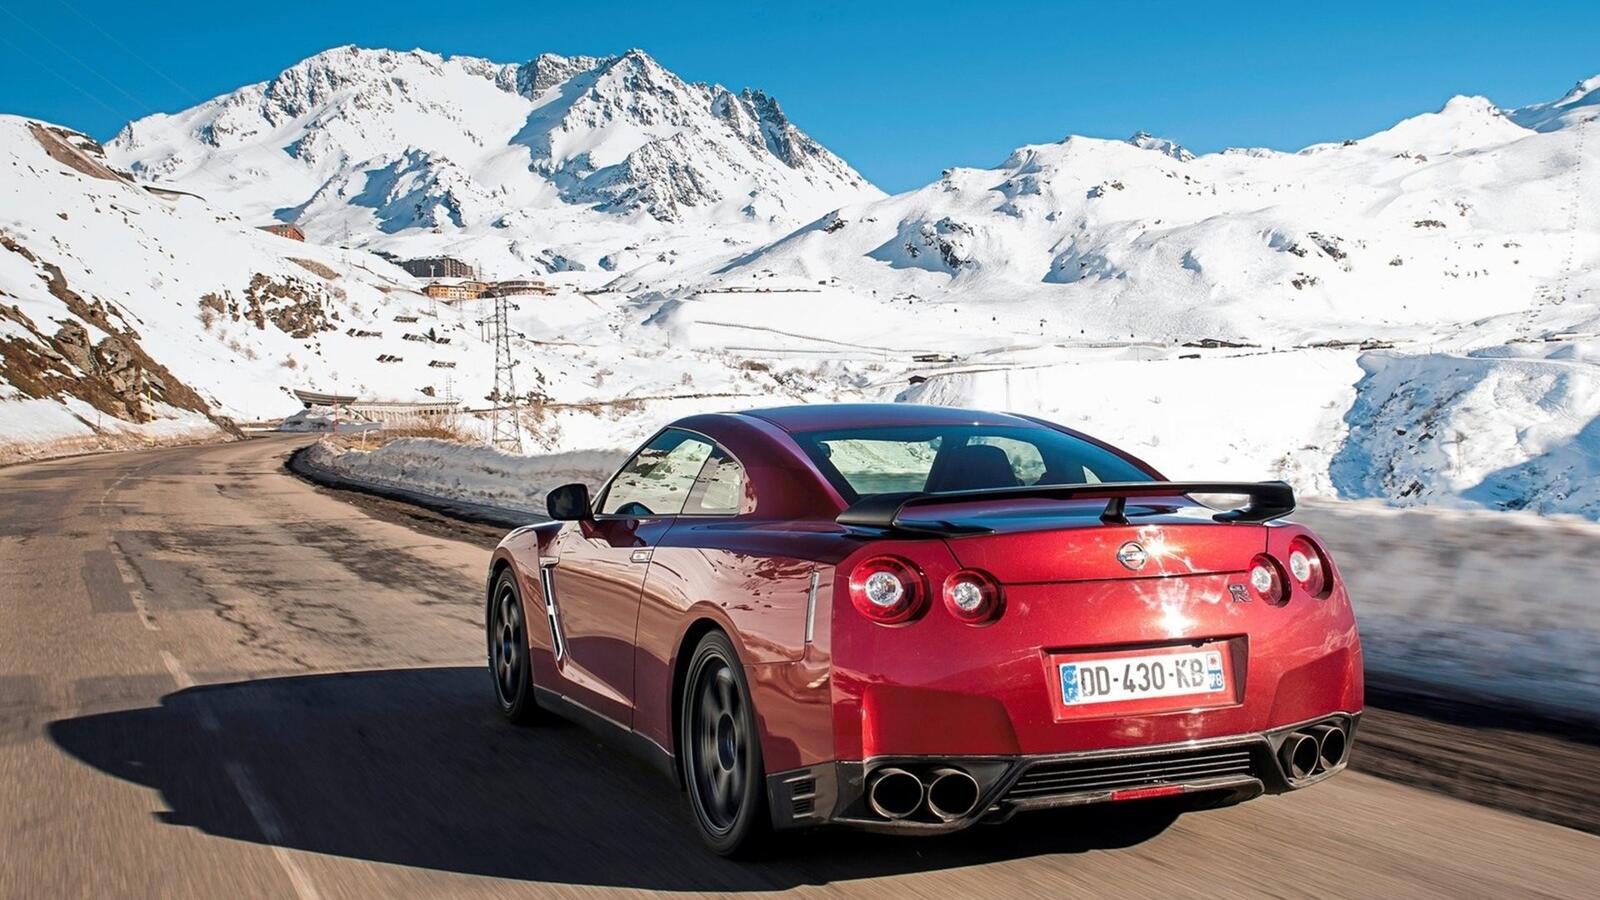 Free photo A red Nissan GTR against a backdrop of snowy mountains